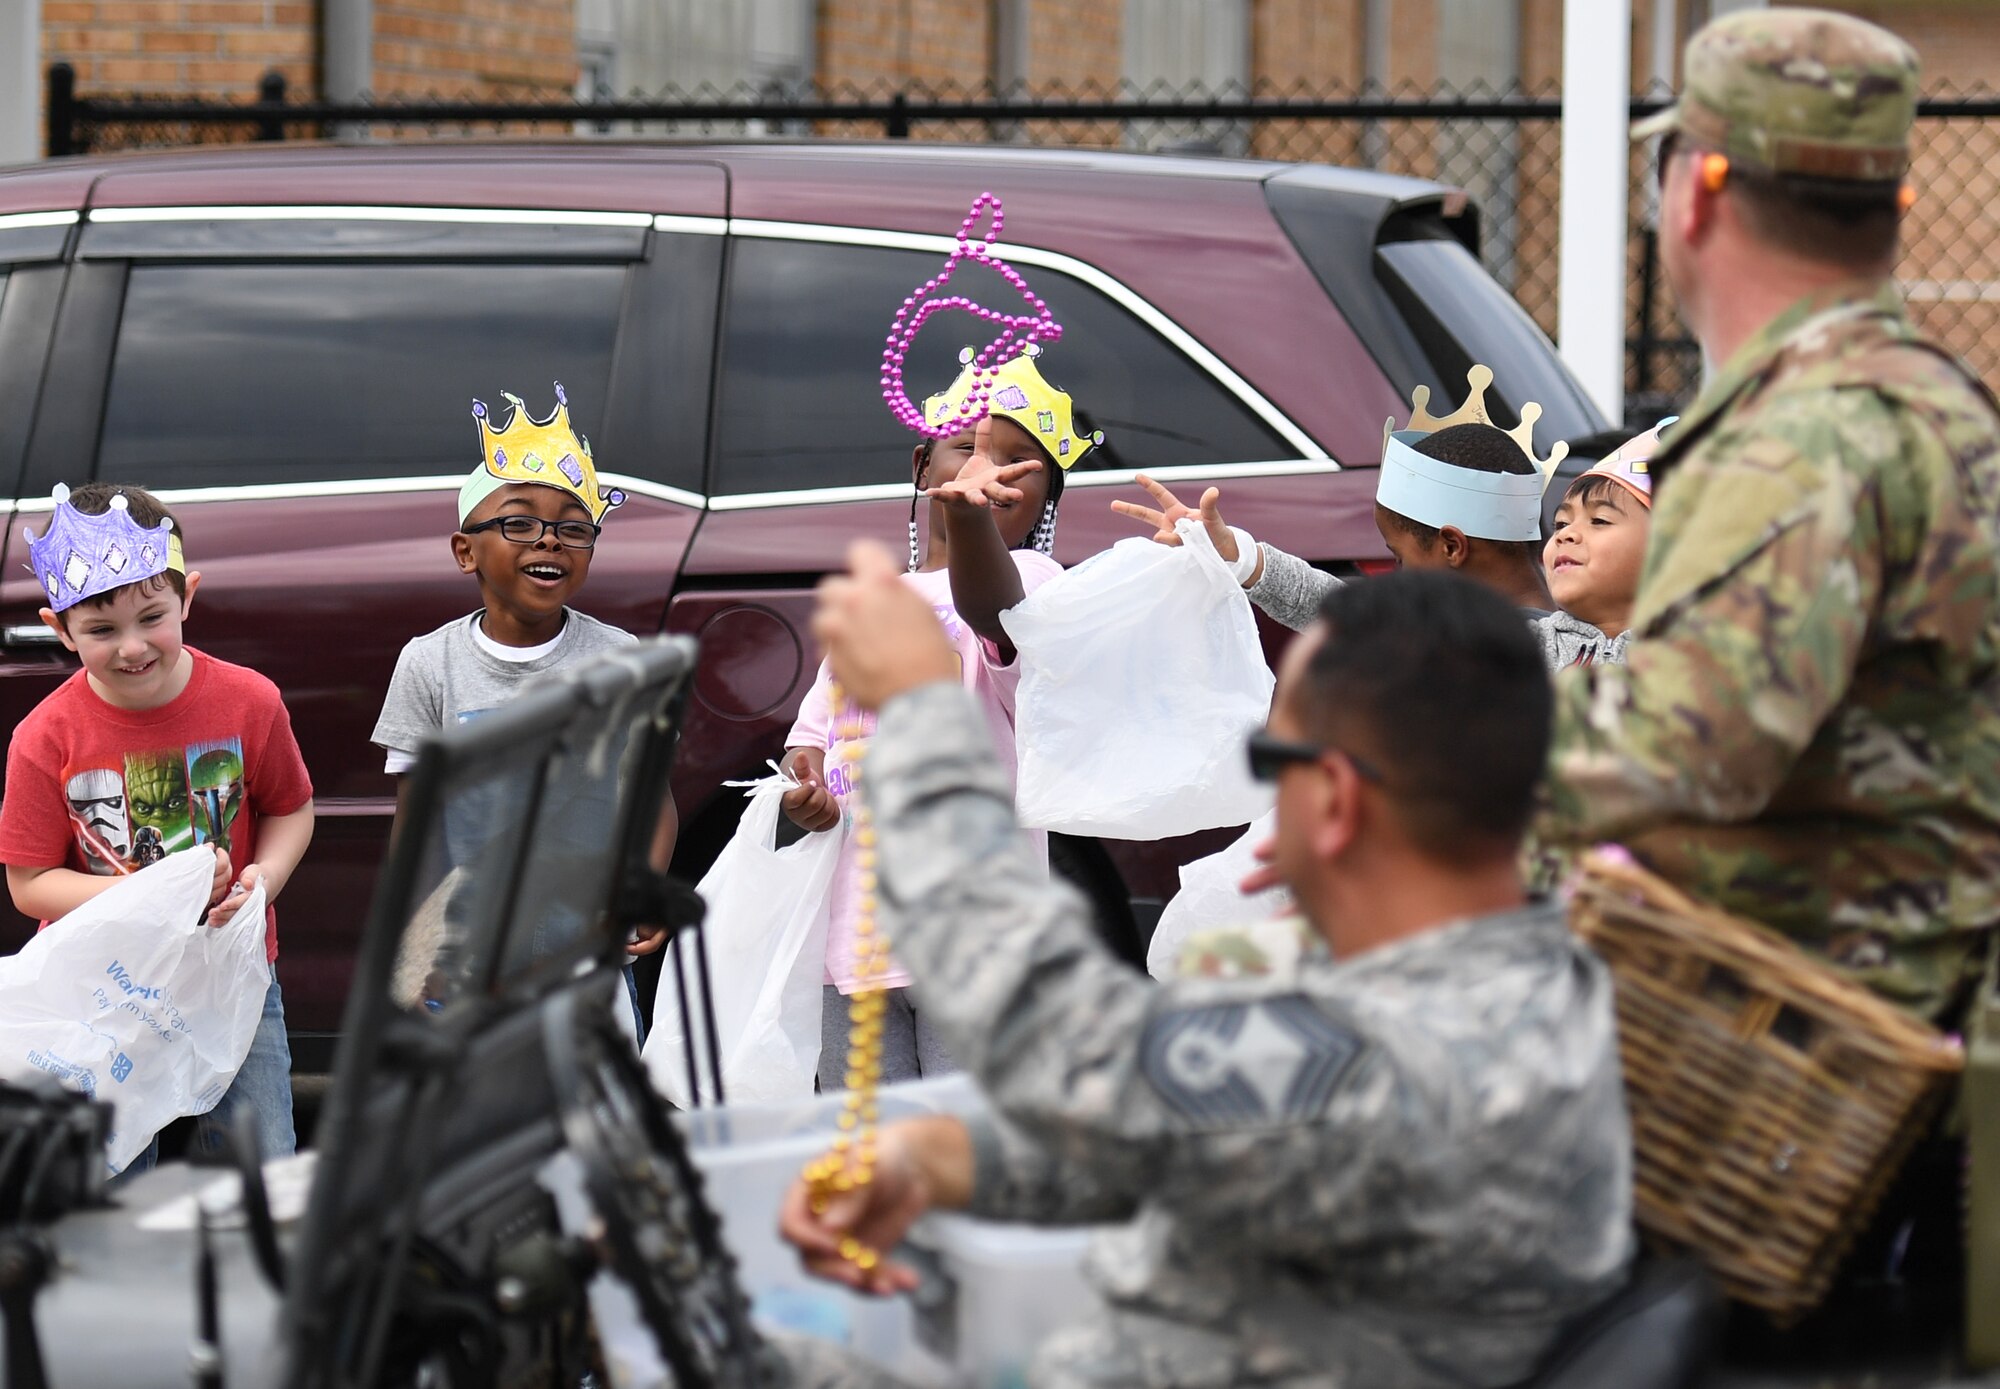 U.S. Air Force Col. Lance Burnett, 81st Training Wing vice commander, and Chief Master Sgt. Ricardo Russo, Keesler Medical Center superintendent, toss beads to children during the Jeff Davis Elementary School Mardi Gras parade in Biloxi, Mississippi, March 1, 2019. Burnett and Russo served as the Grand Marshals while other base personnel also participated in the event. Keesler leadership, Honor Guard and Airmen participated in various festivities throughout the Mardi Gras season, which is celebrated by the local communities. (U.S. Air Force photo by Kemberly Groue)